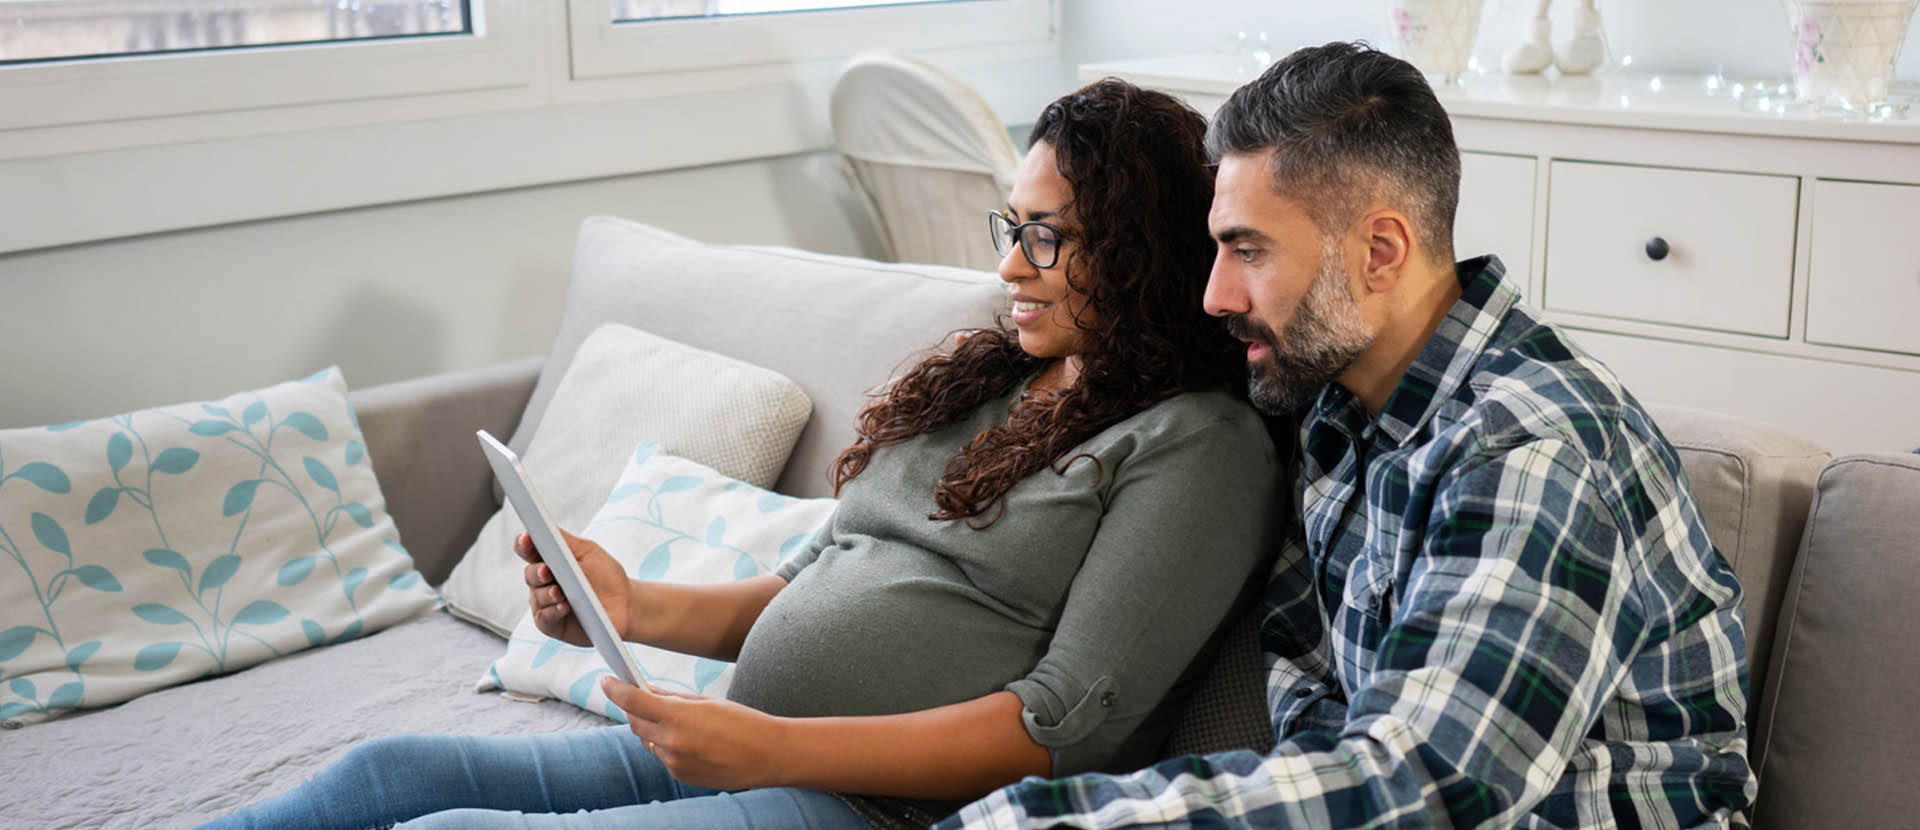 How Can Partners Prepare for Having a Baby?